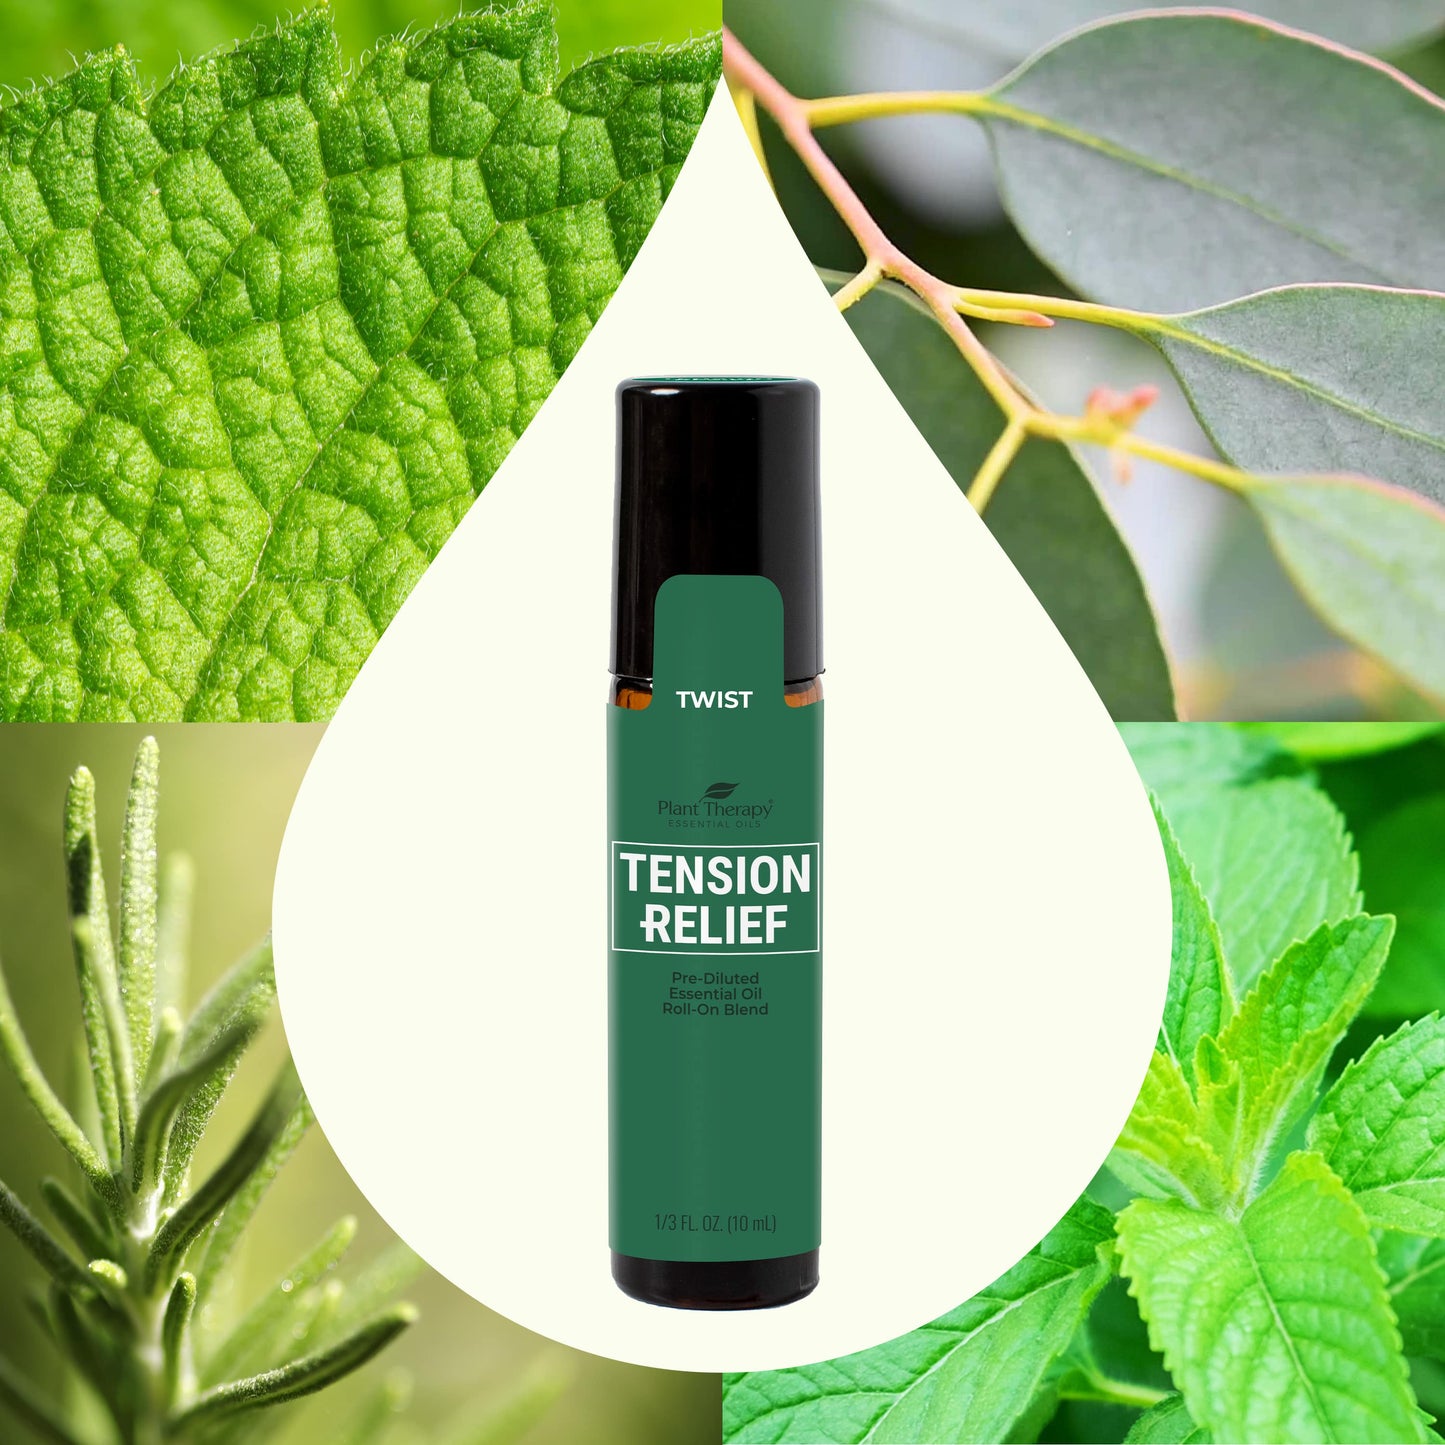 Tension Relief Essential Oil Blend Pre-Diluted Roll-On 